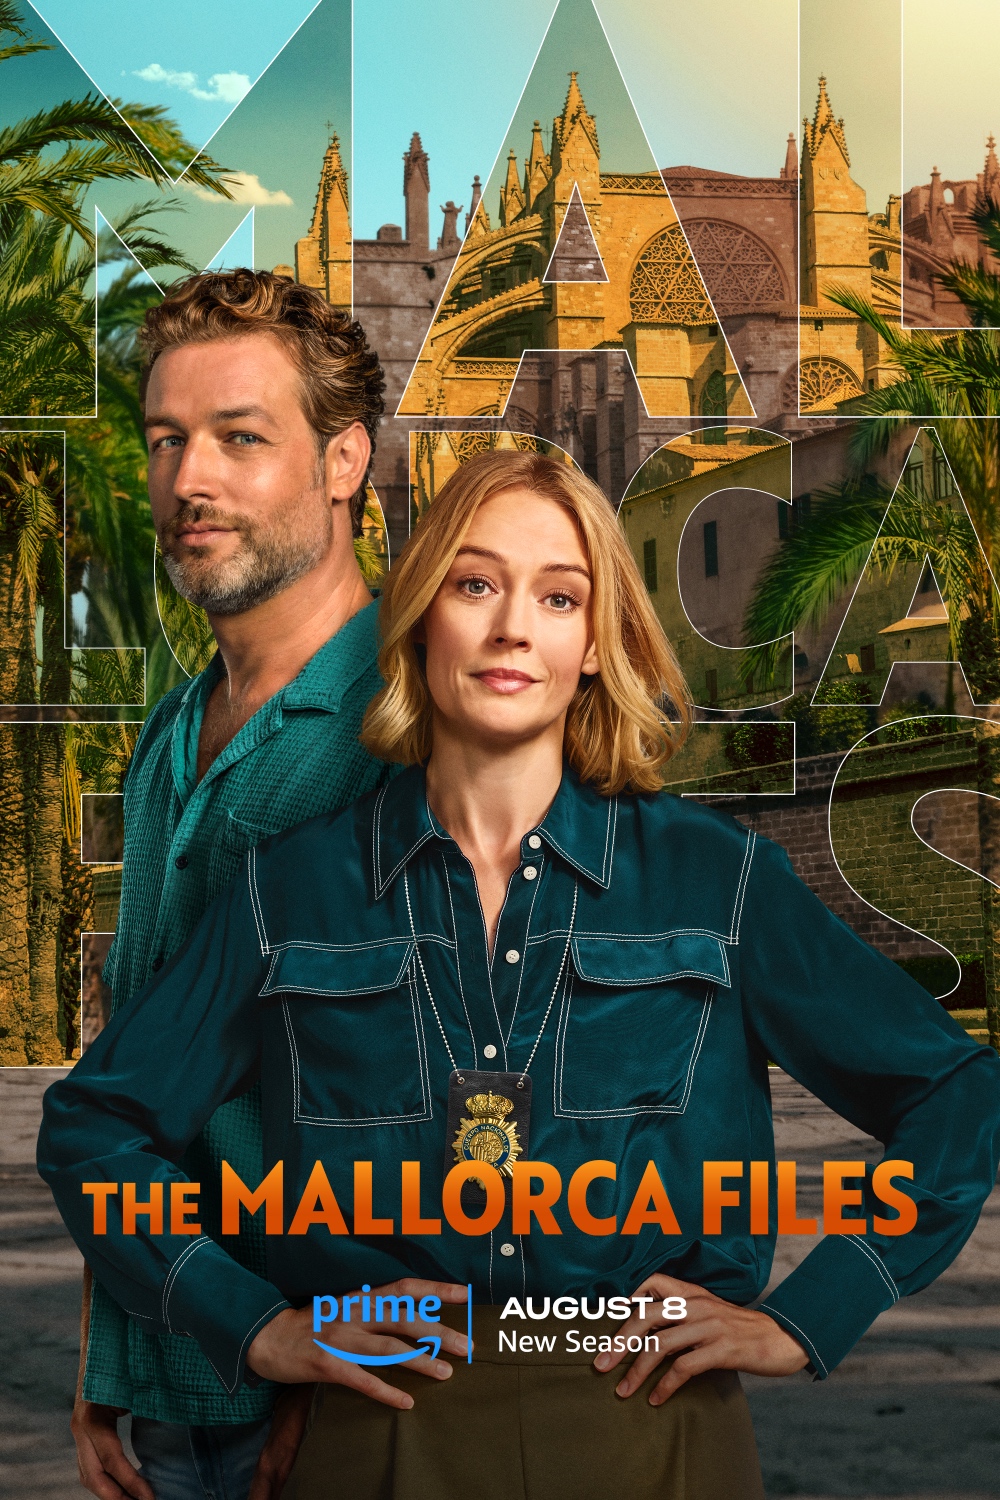 Prime Video Releases Official Trailer and Key Art for Season Three of The Mallorca Files - August 8